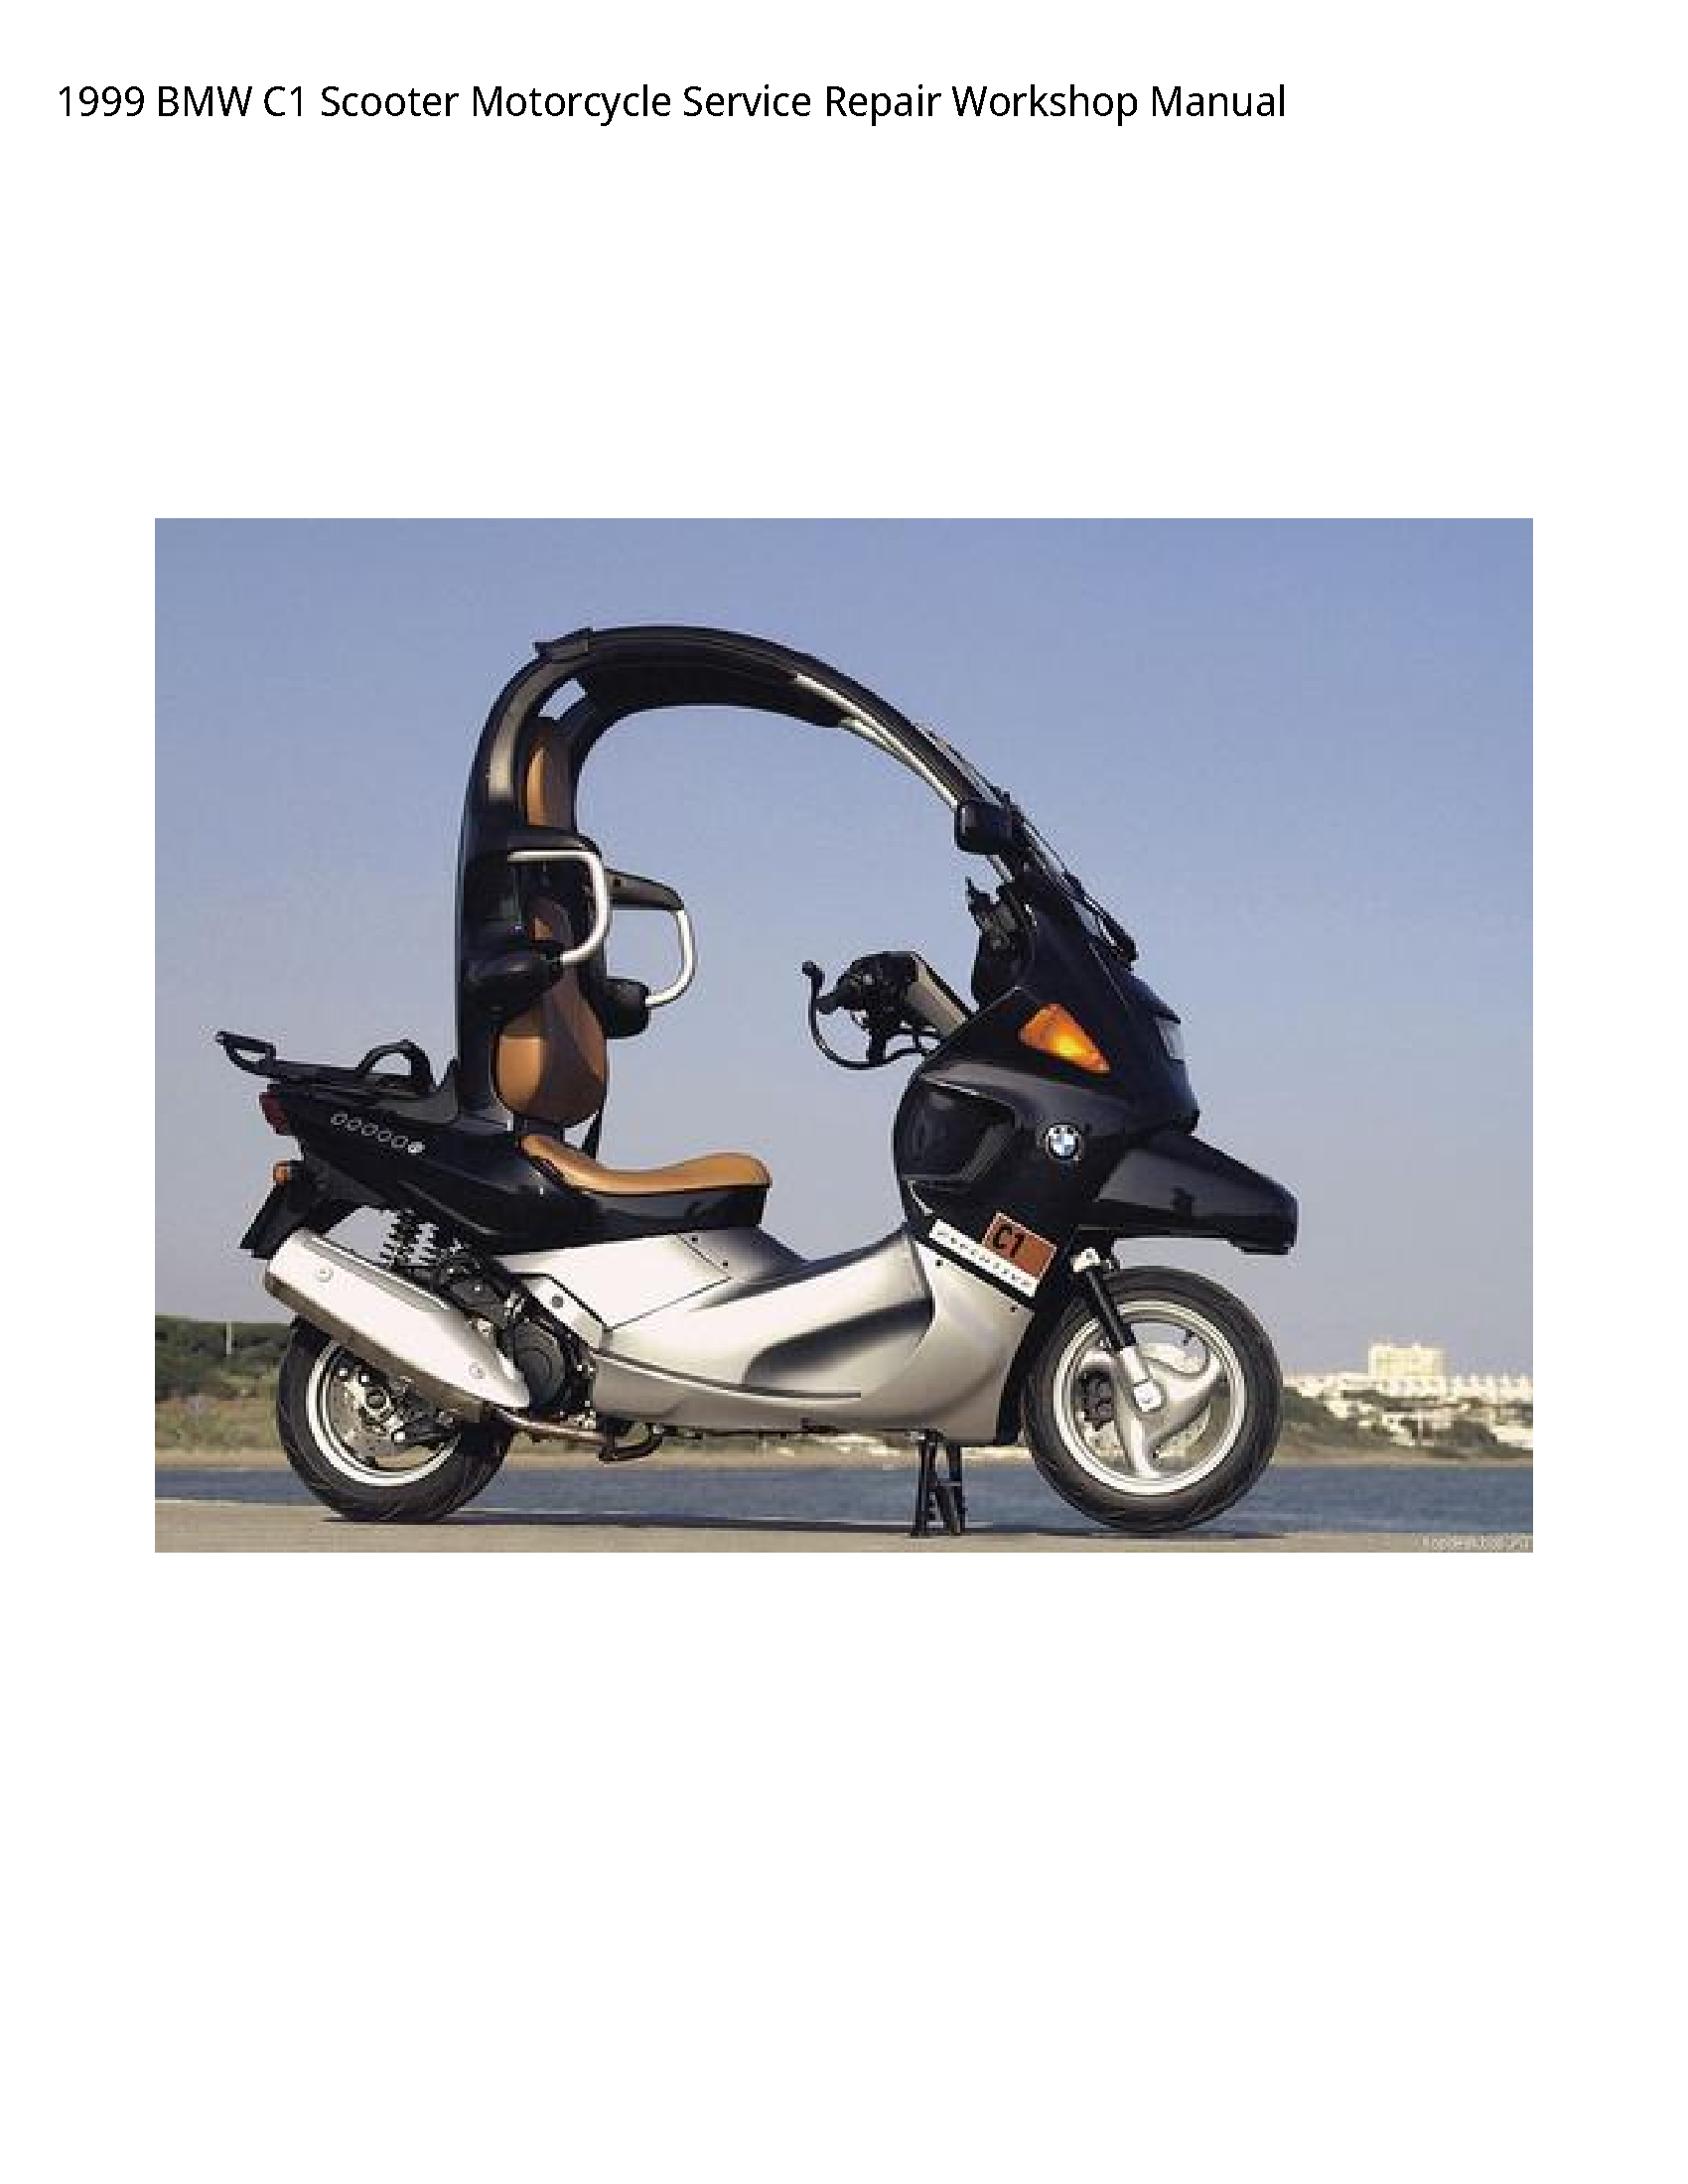 BMW C1 Scooter Motorcycle manual